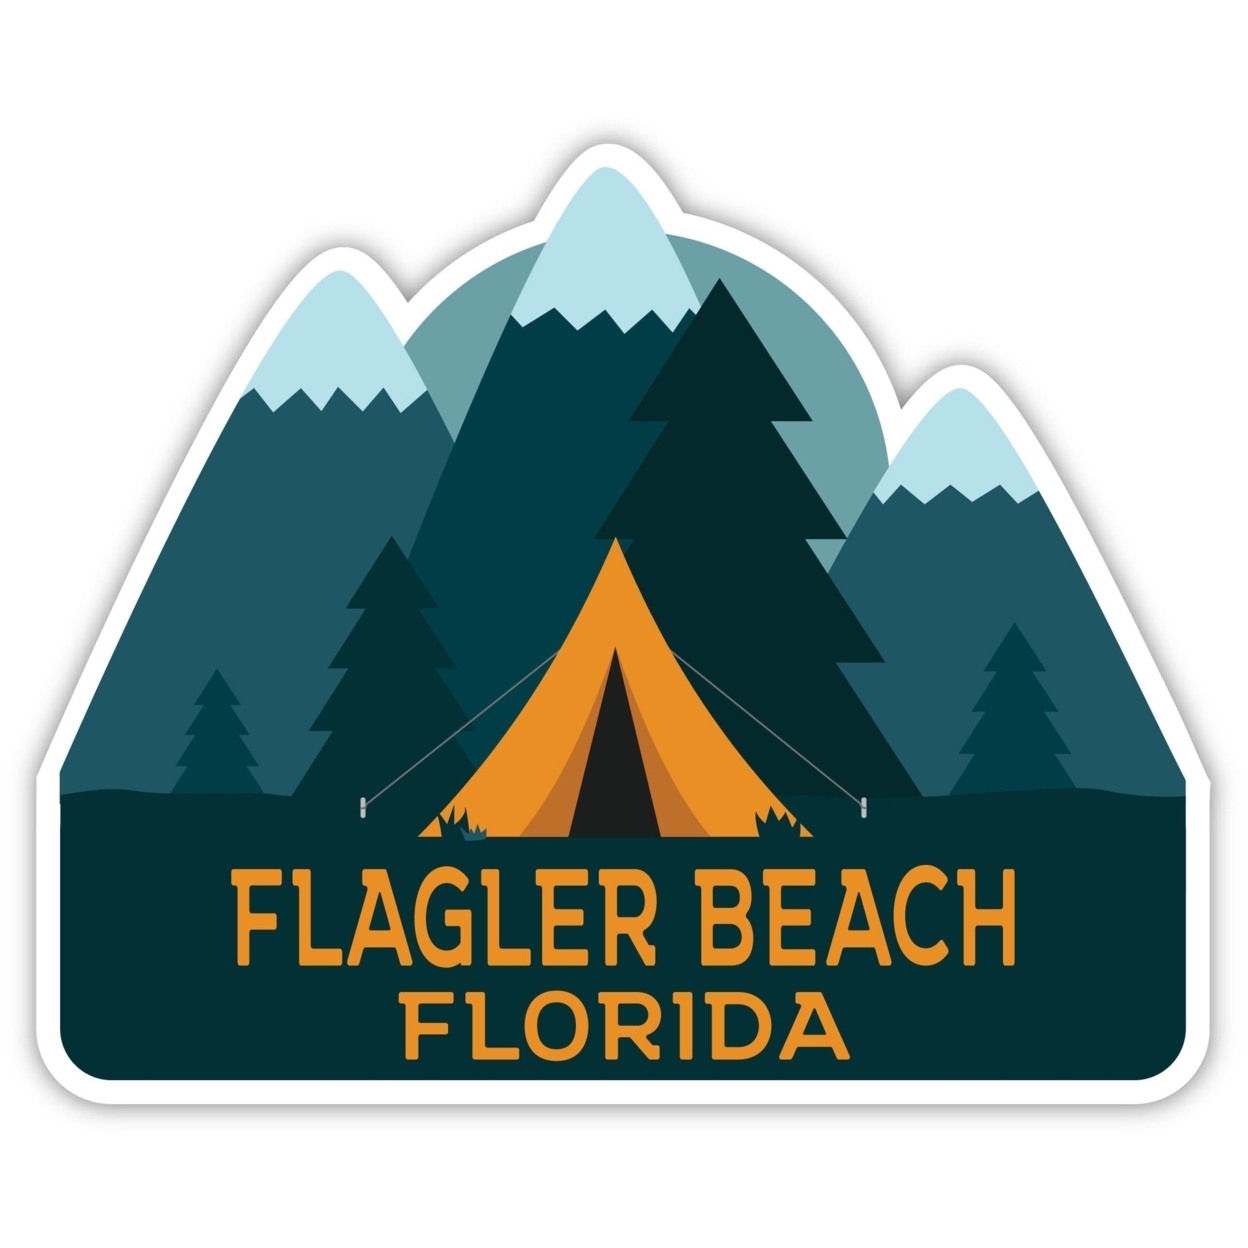 Flagler Beach Florida Souvenir Decorative Stickers (Choose Theme And Size) - 4-Pack, 10-Inch, Tent